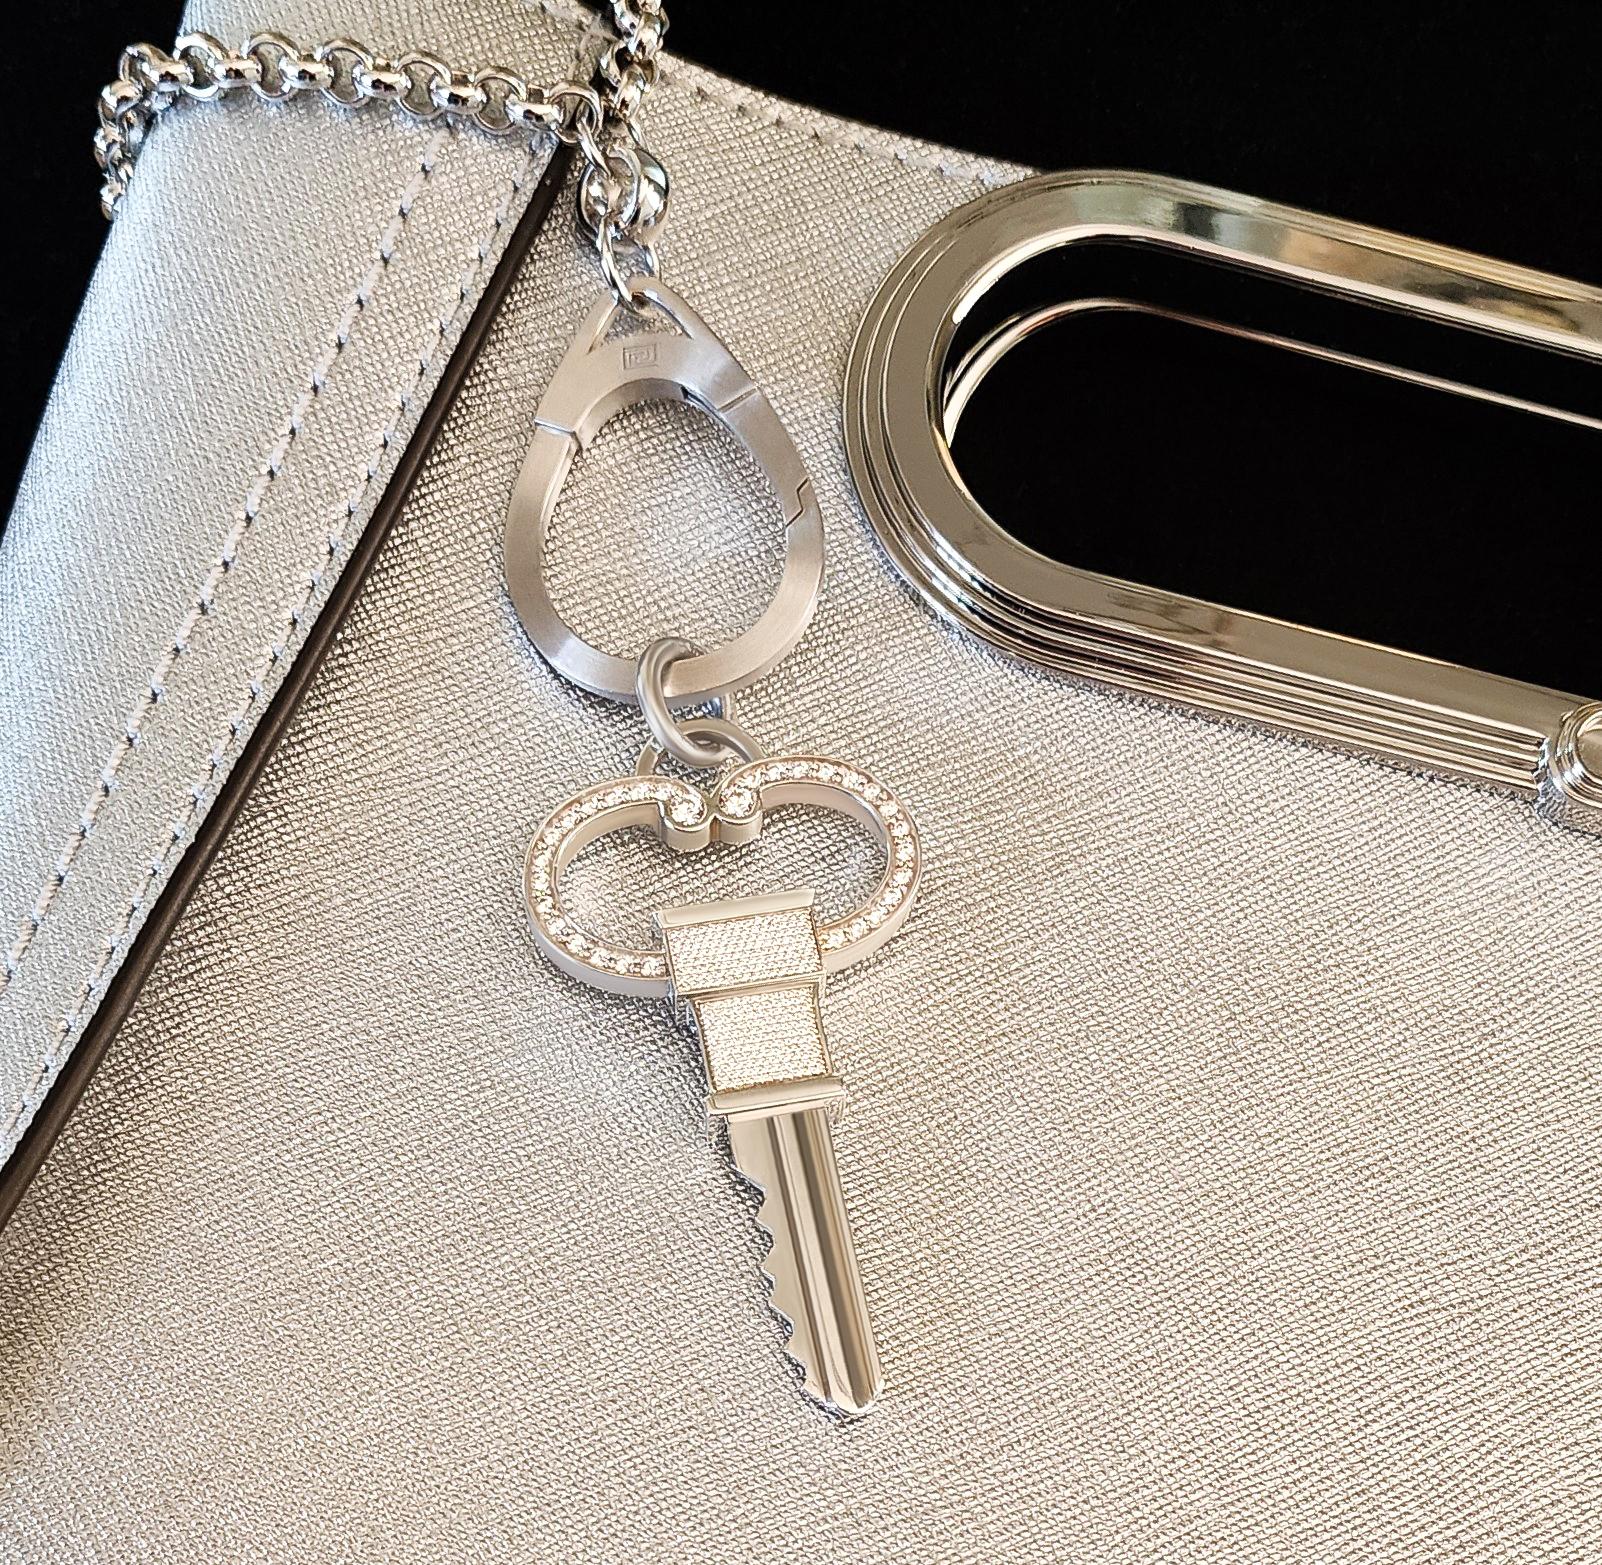 Inspired by the classic skeleton key’s iconic shaped design, our Iconic Sterling Silver, Neo Classical key, features curled arches studded with white sapphire pave on the front of key and is treated with an Anti-Tarnish finish to maintain a lasting